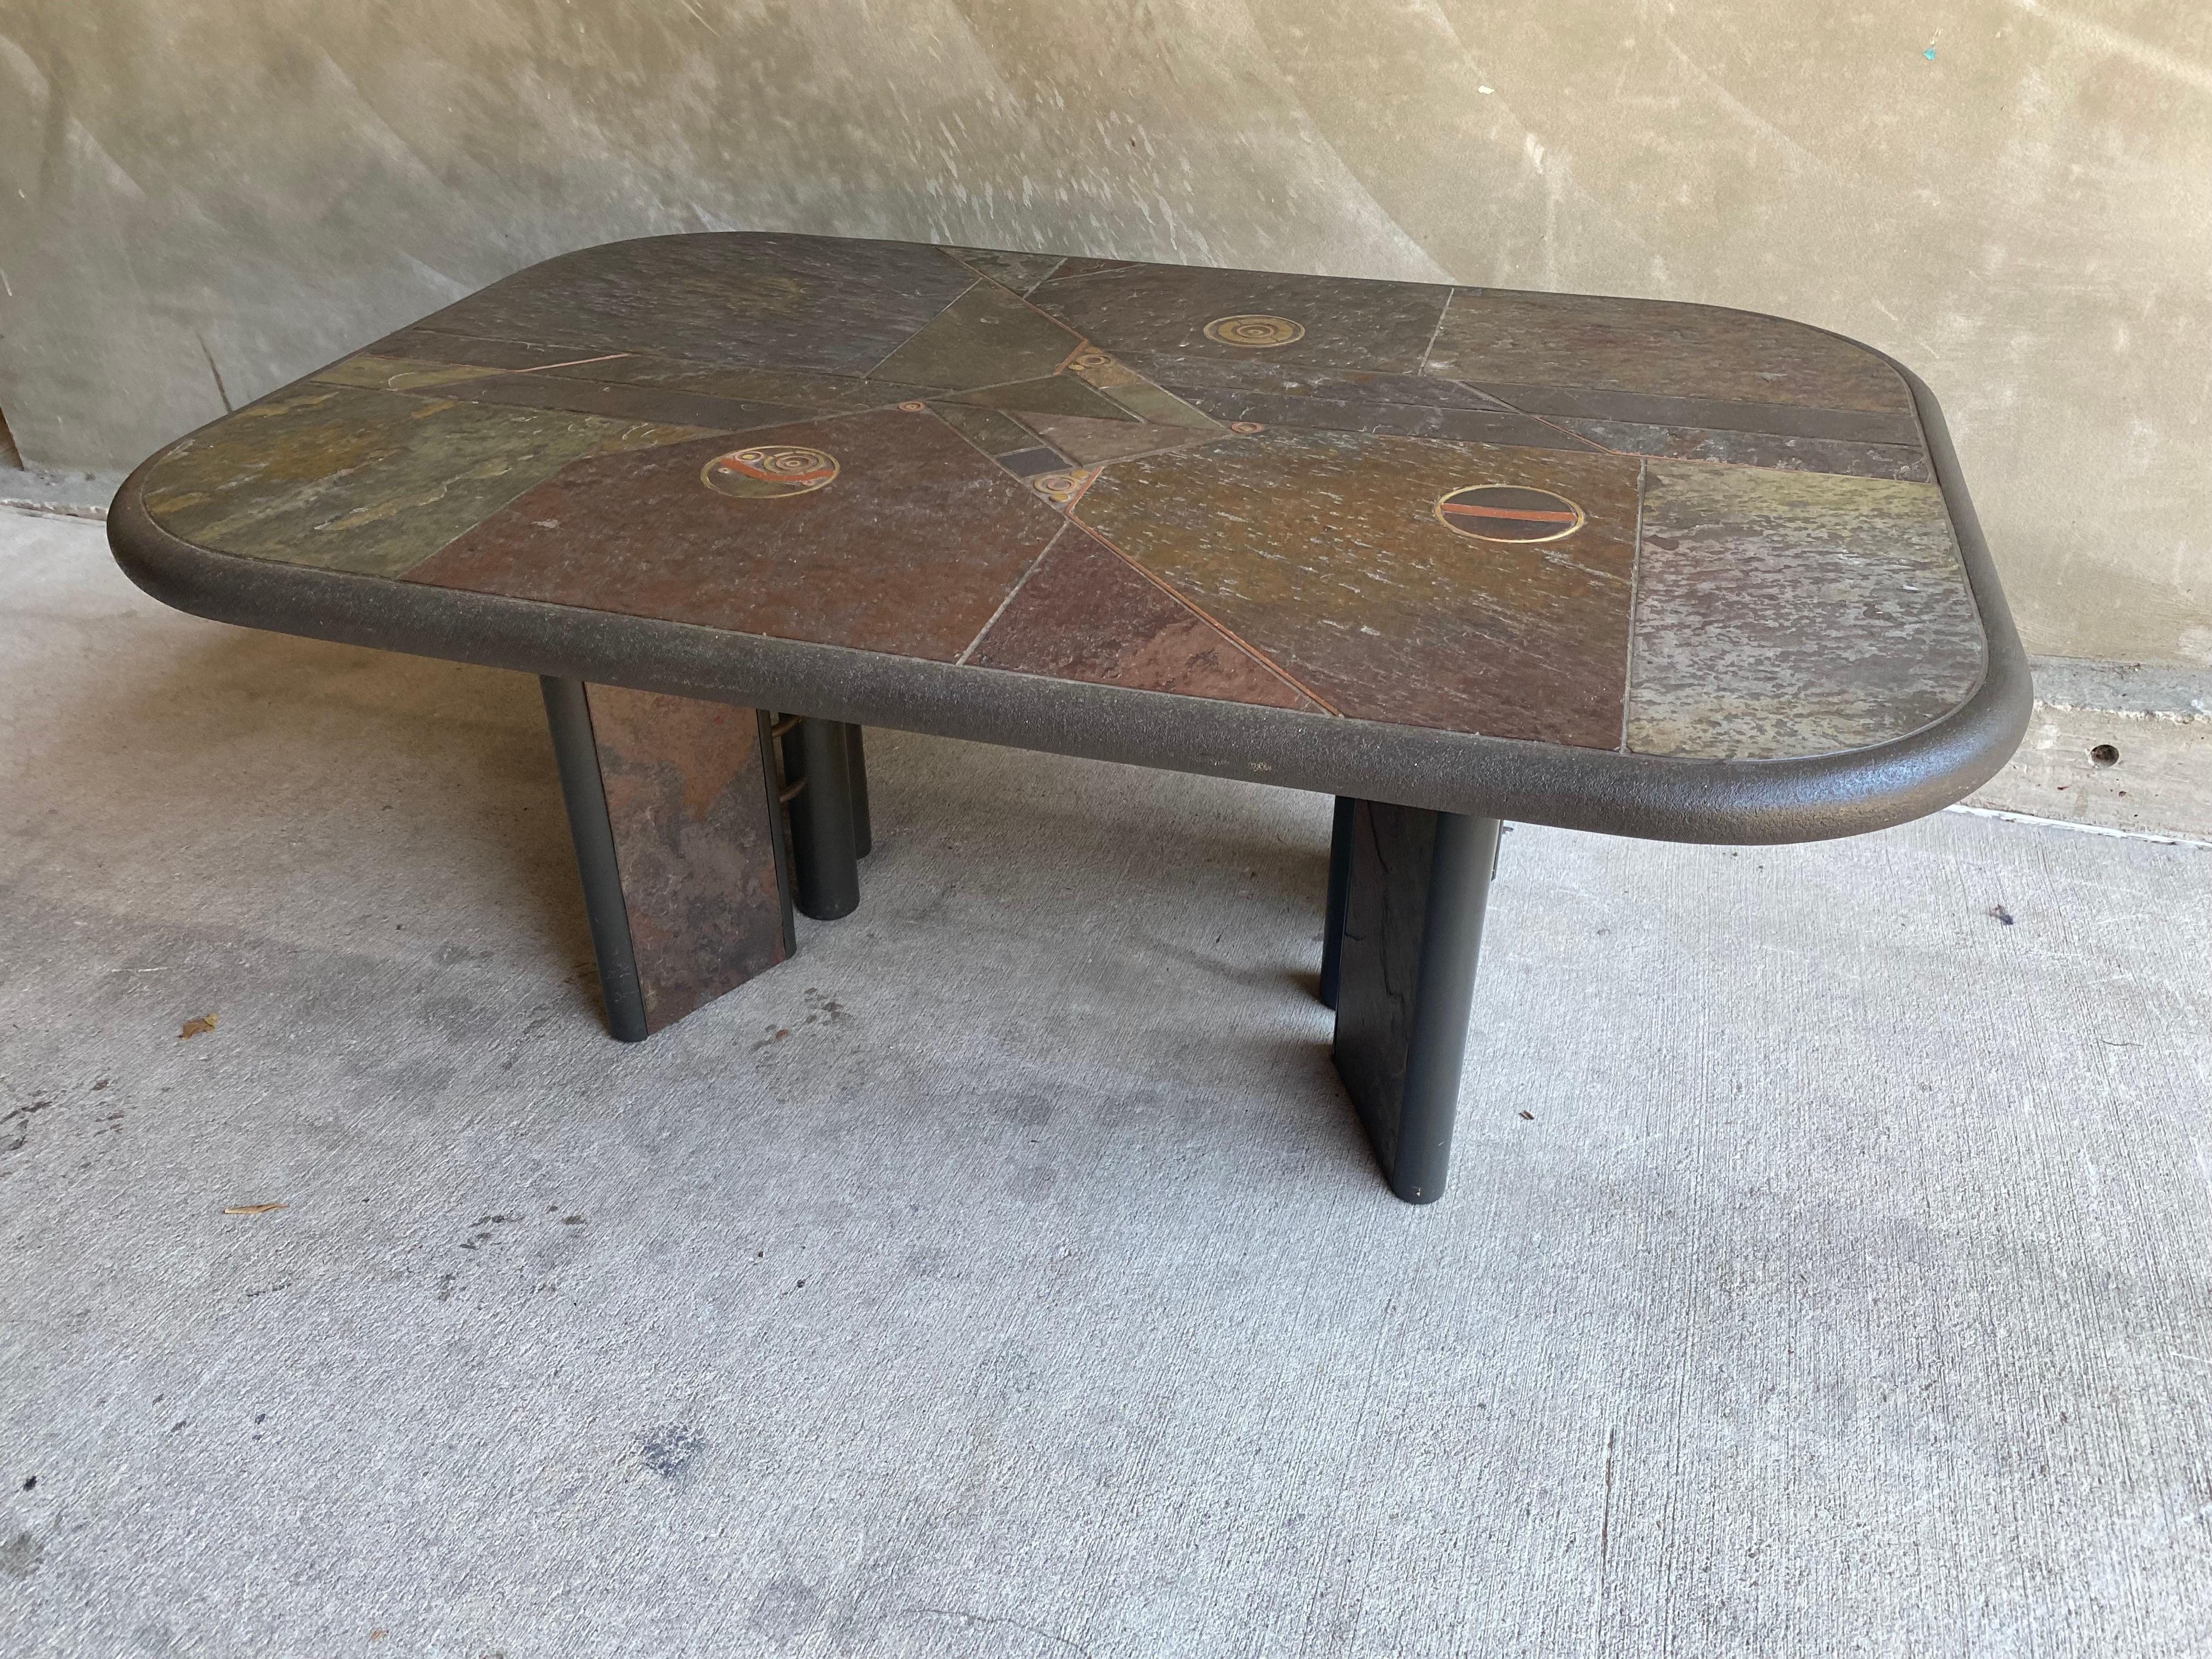 Brutalist cocktail table with slate style top and brass and copper inlay in asymmetric pattern. Belgium, 1970's

Matching smaller square shaped cocktail table or side table available on listing: LU1140230419032.